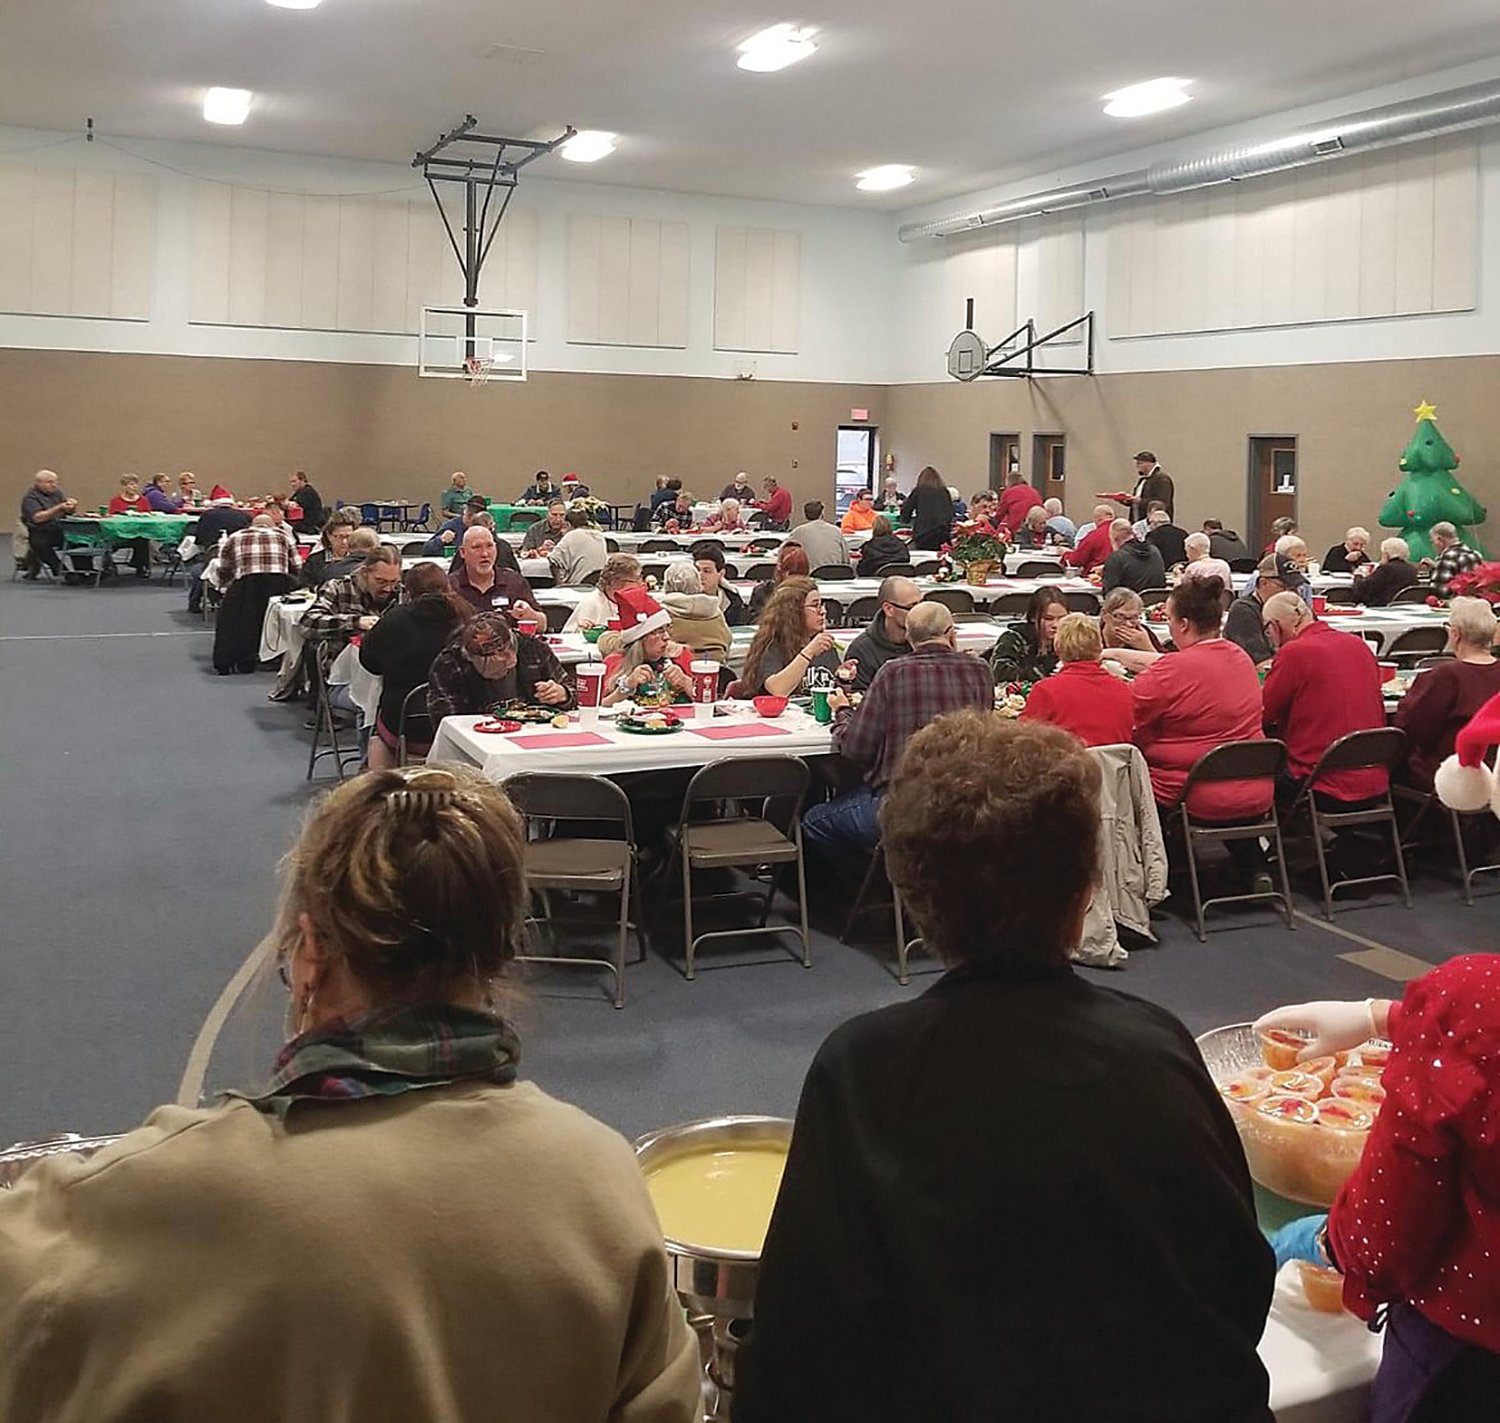 Montgomery County Christmas Dinner volunteers watch as diners enjoy a Christmas Day meal.